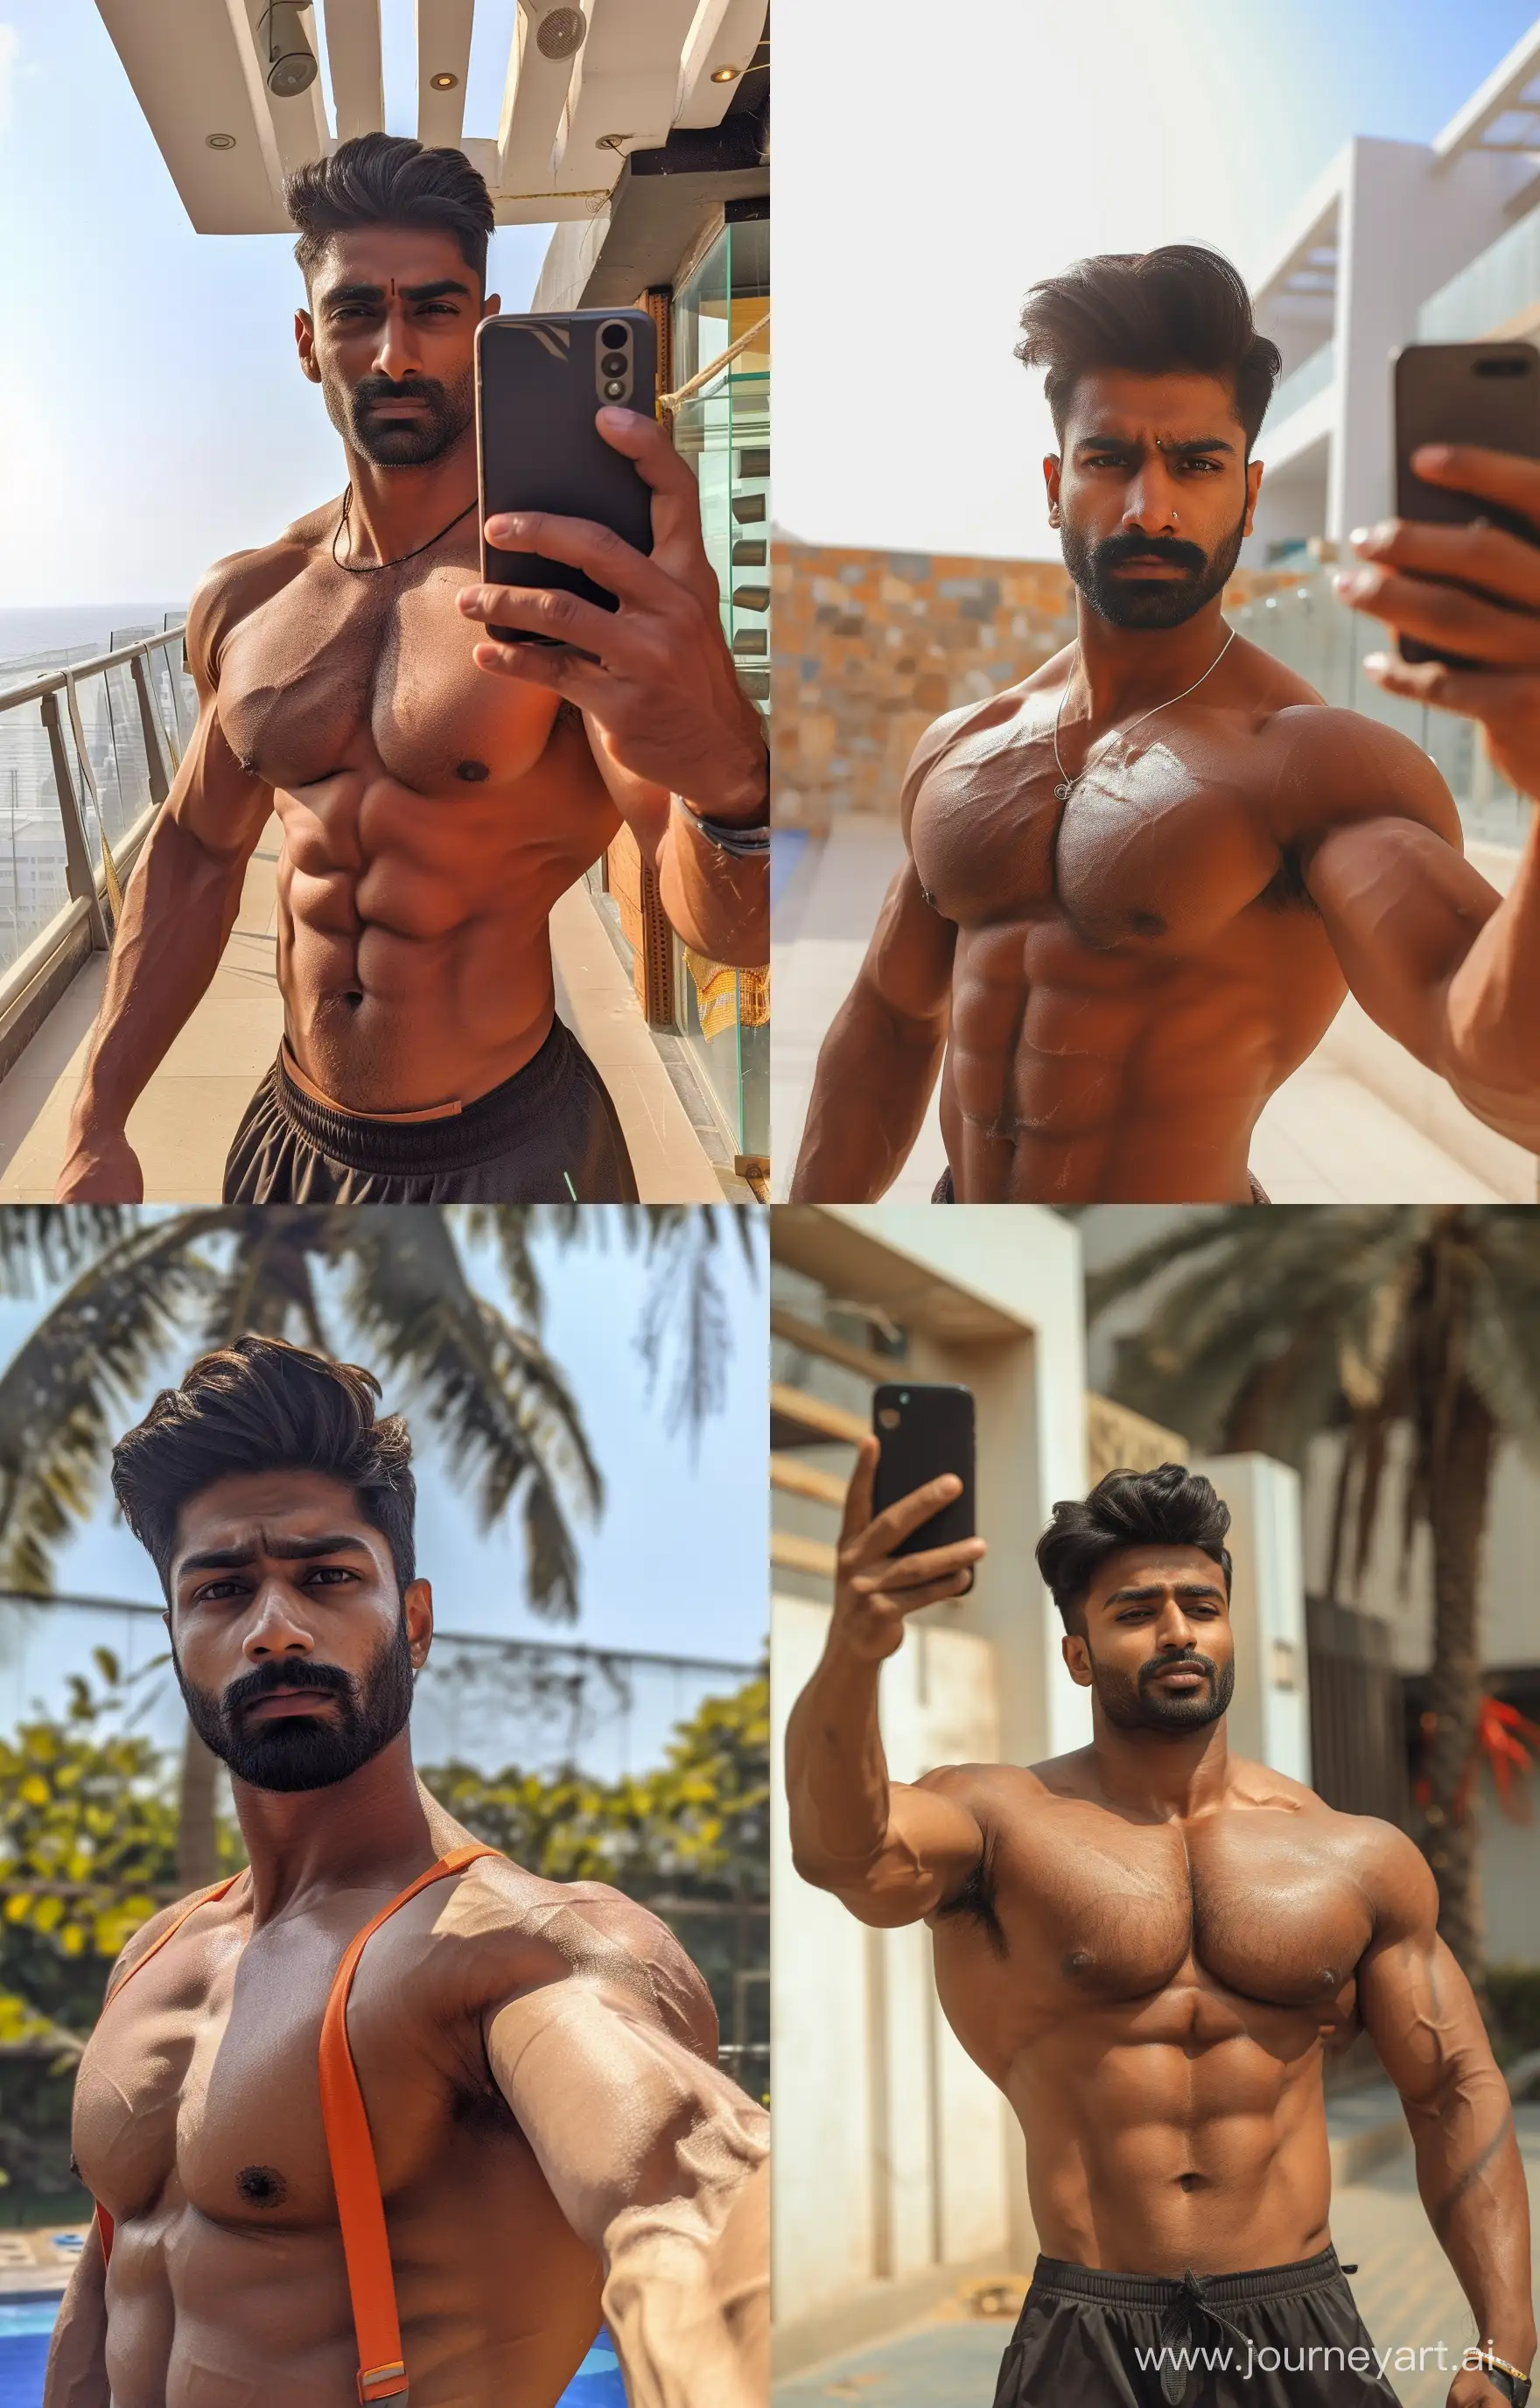 Sunkissed-Indian-Man-with-Chiseled-Abs-Capturing-a-Selfie-Moment